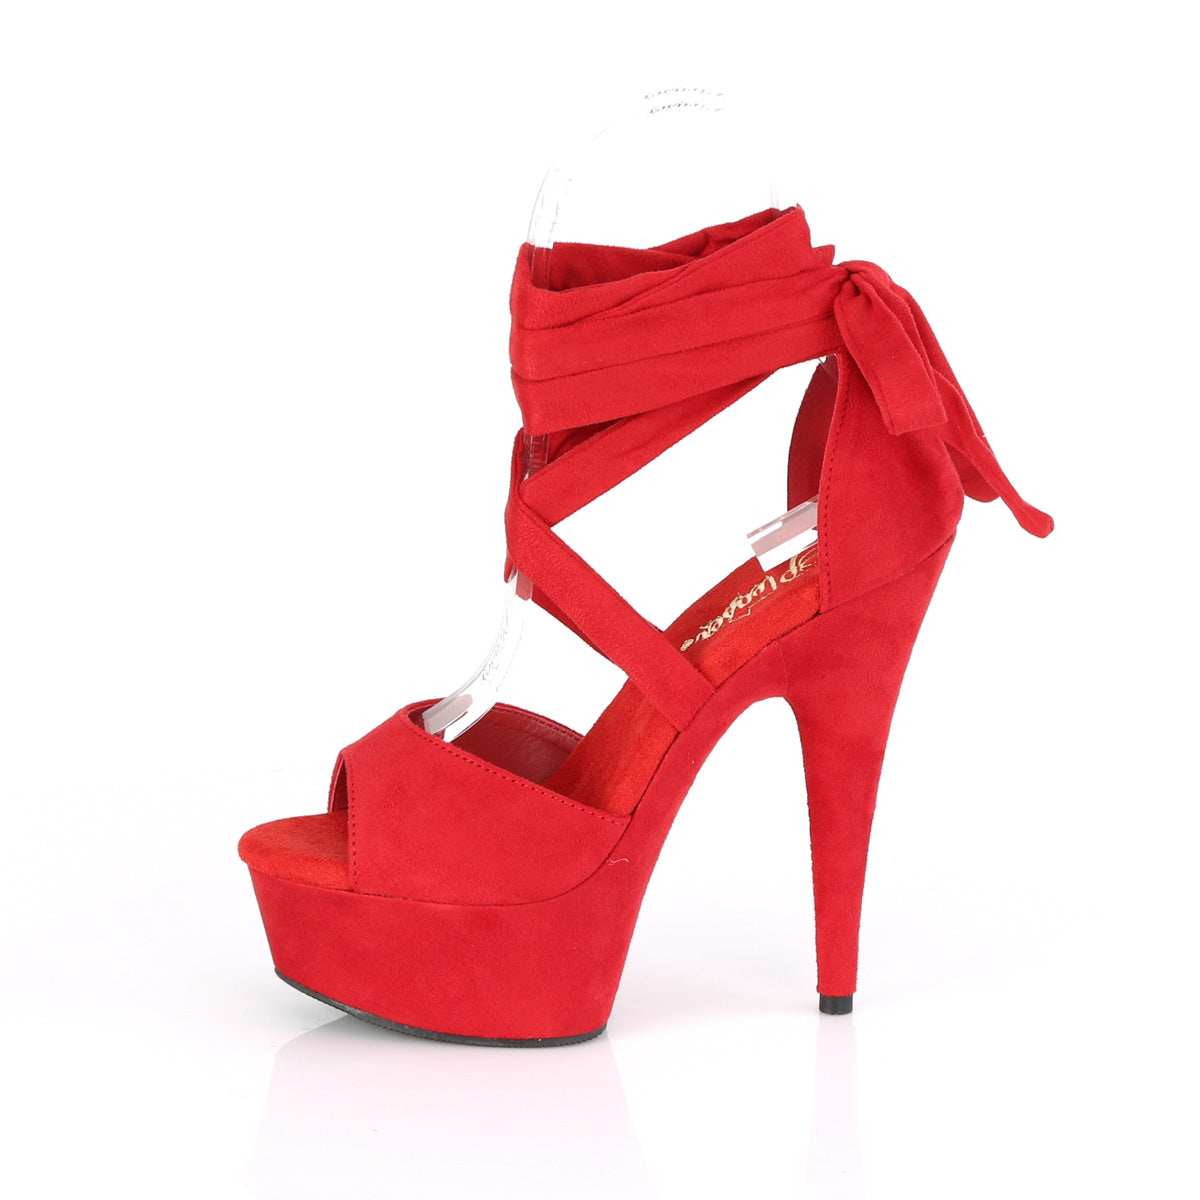 Pleaser Sandalias para mujer DELIGHT-679 Gamuza Red Faux / Red Faux Suede